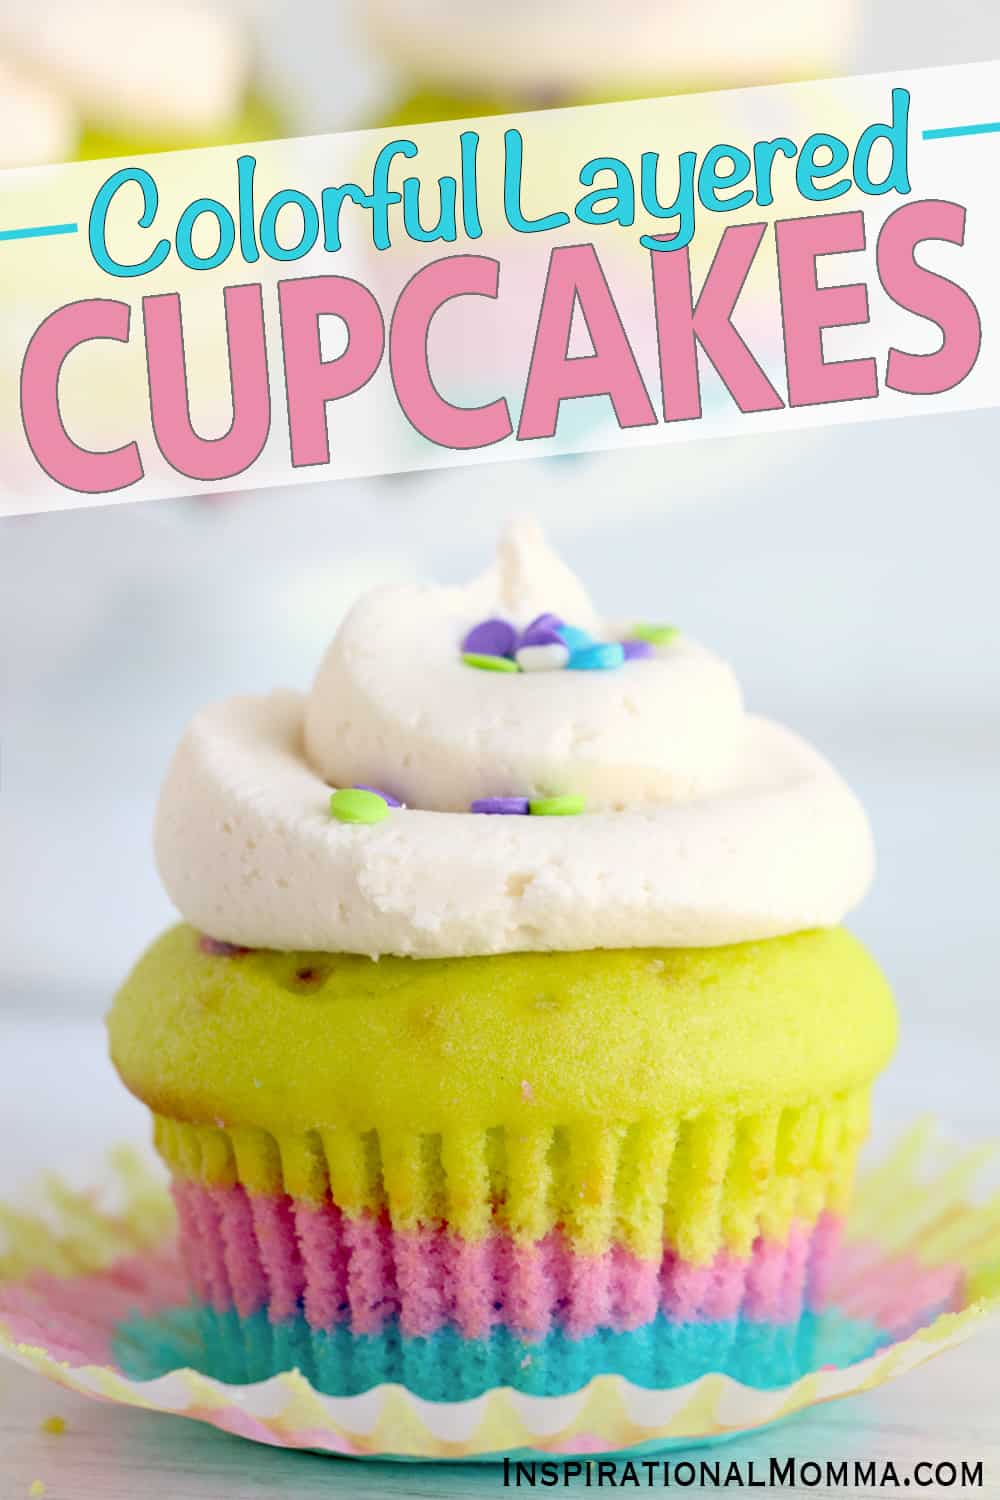 Colorful Layered Cupcakes are a fun and simple dessert to make. These bright cupcakes are bound to liven up your day. #inspirationalmomma #colorfullayeredcupcakes #desserts #cupcakes #layeredcupcakes #cupcakerecipes #dessertrecipes